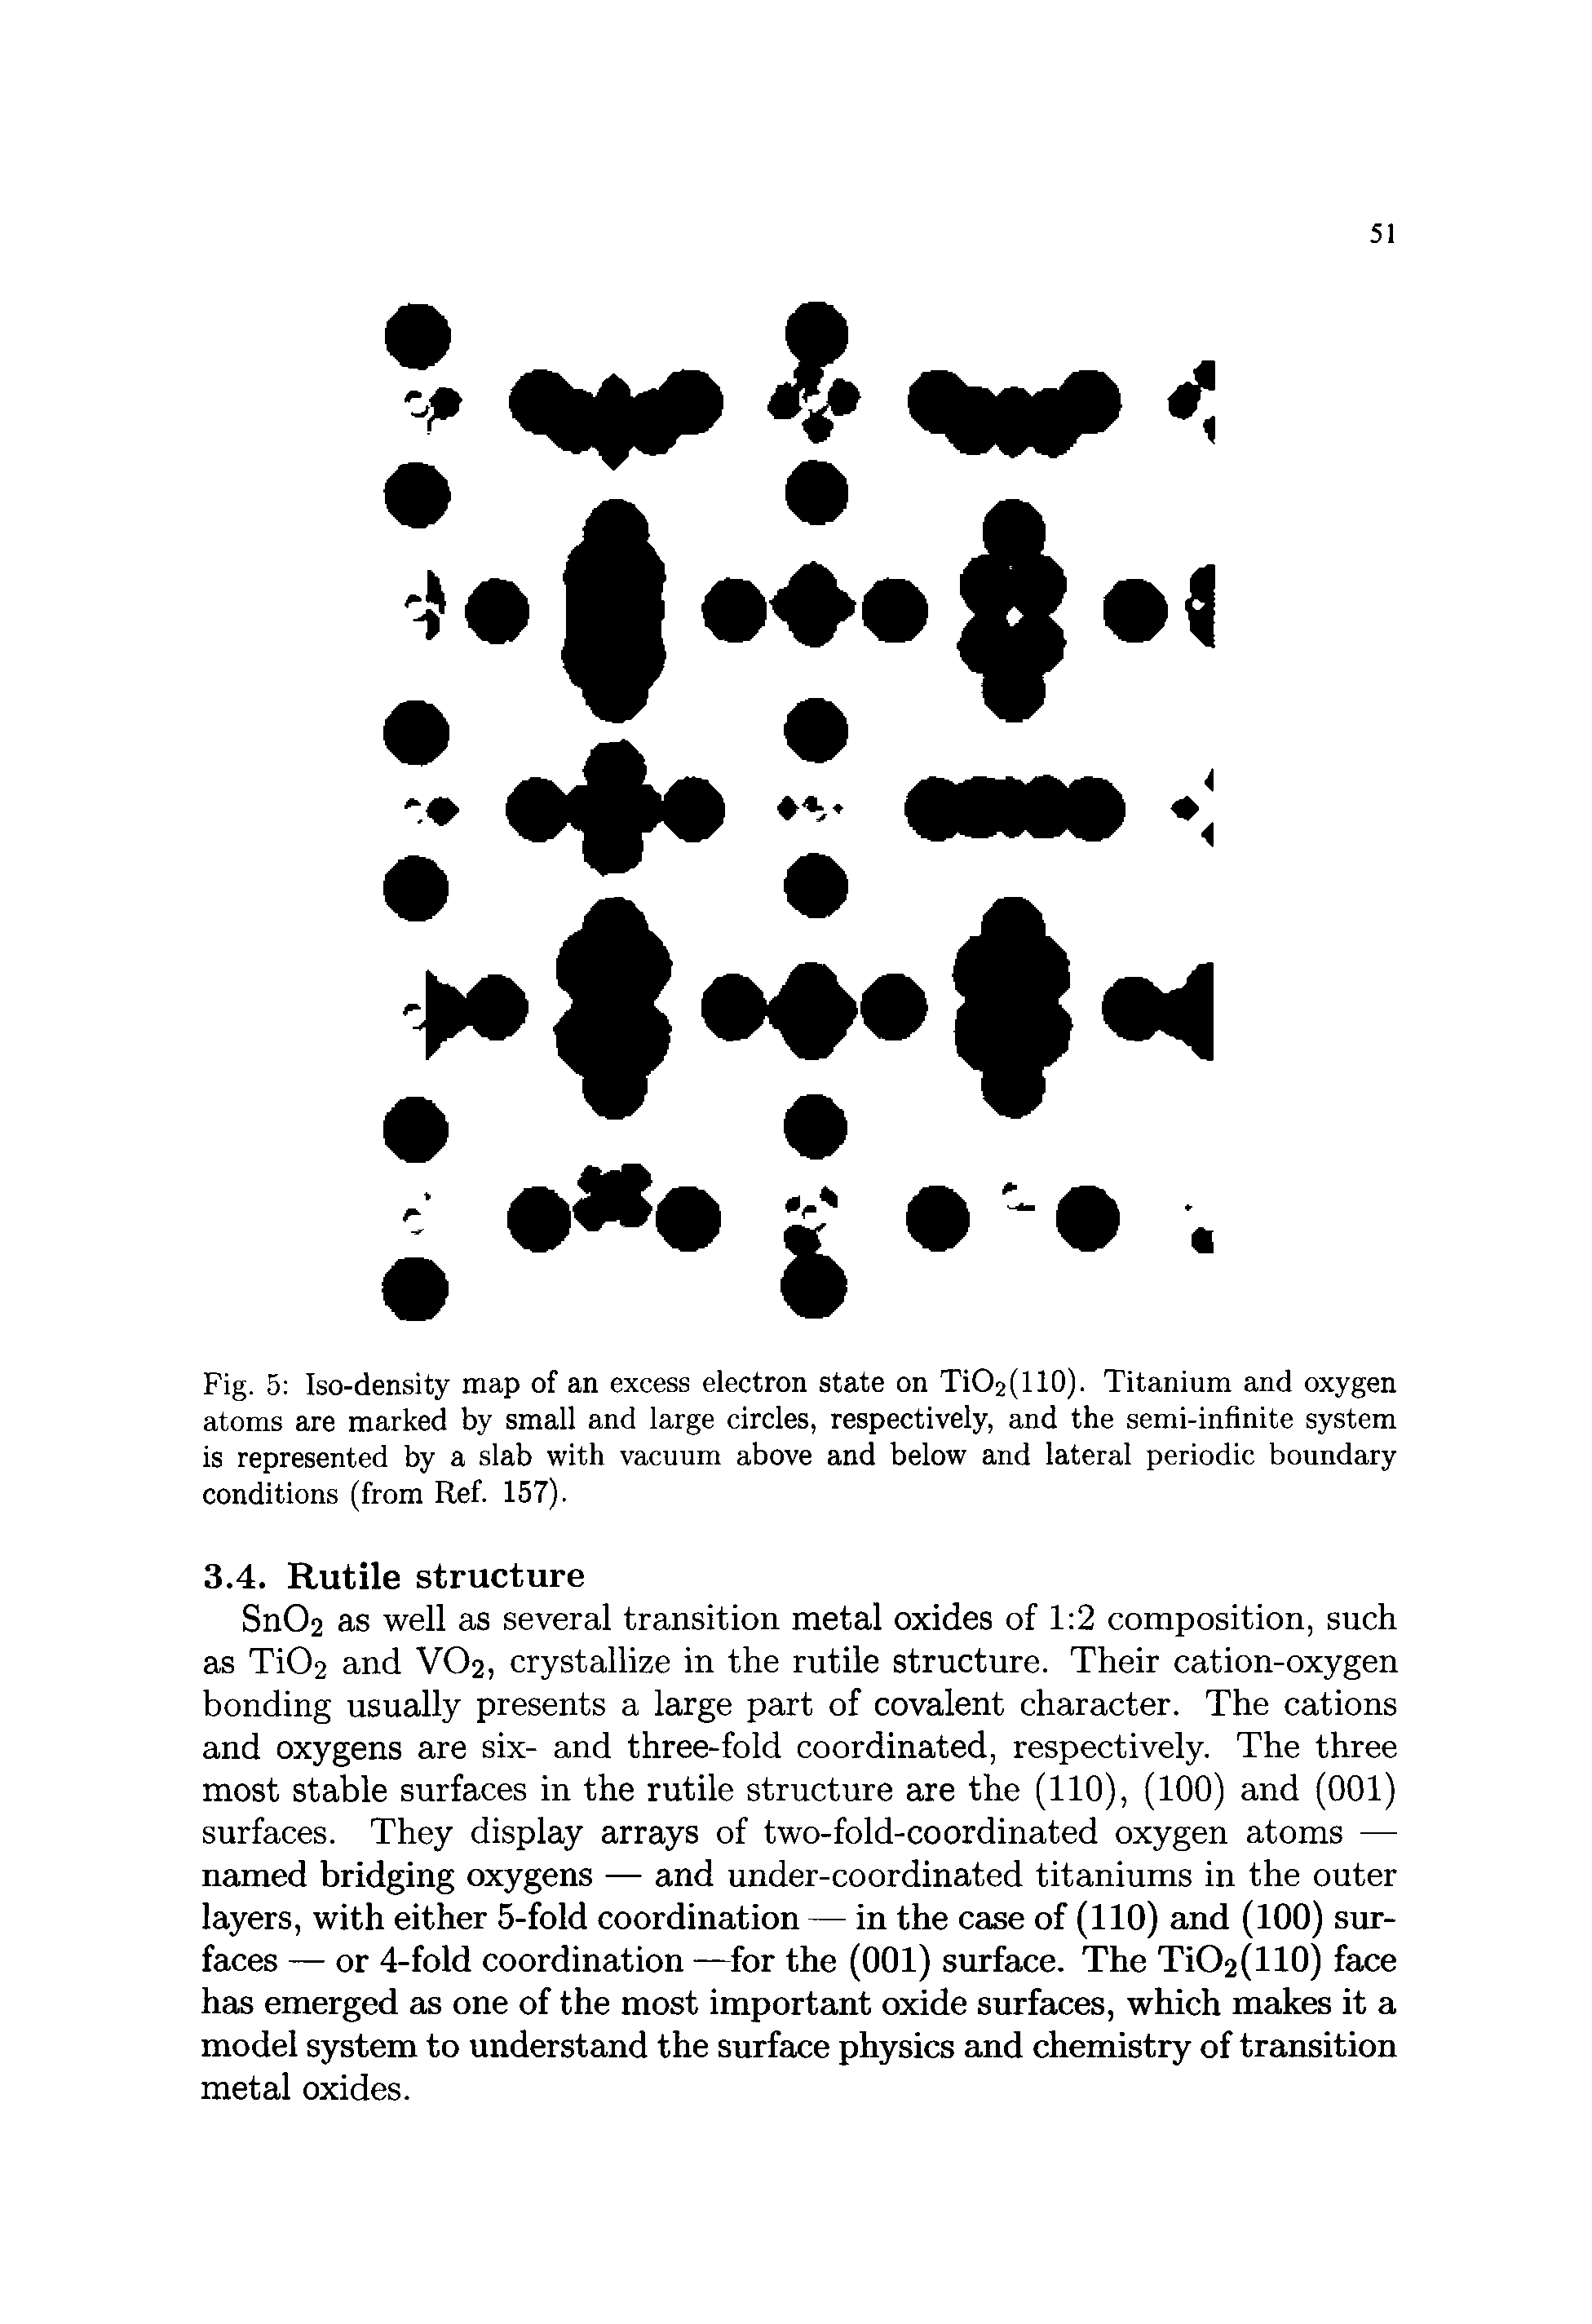 Fig. 5 Iso-density map of an excess electron state on TiO2(110). Titanium and oxygen atoms are marked by small and large circles, respectively, and the semi-infinite system is represented by a slab with vacuum above and below and lateral periodic boundary conditions (from Ref. 157).